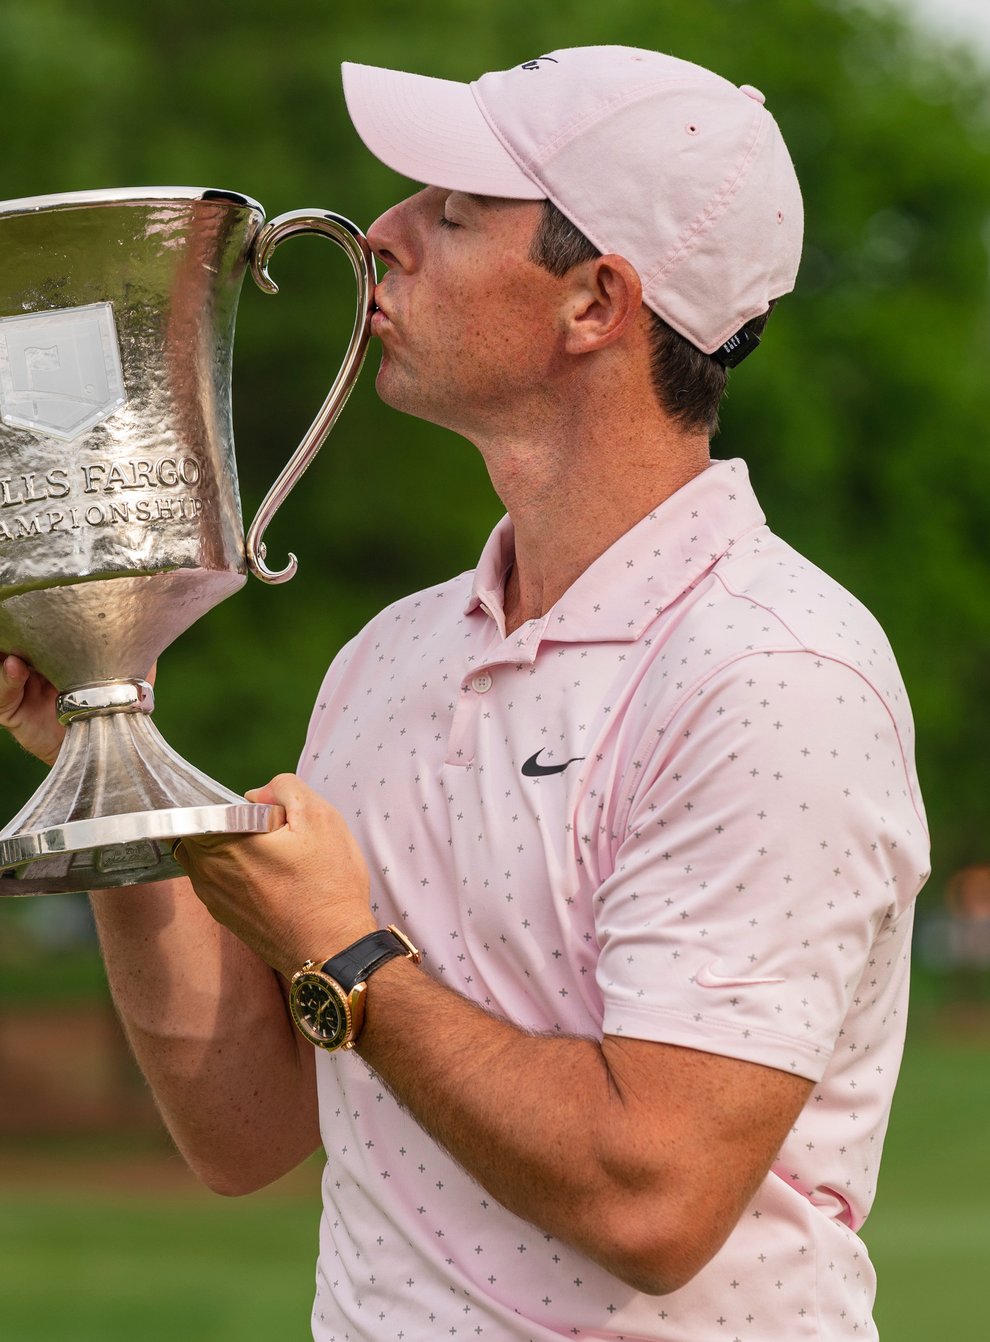 Rory McIlroy holds the trophy after winning the Wells Fargo Championship at Quail Hollow